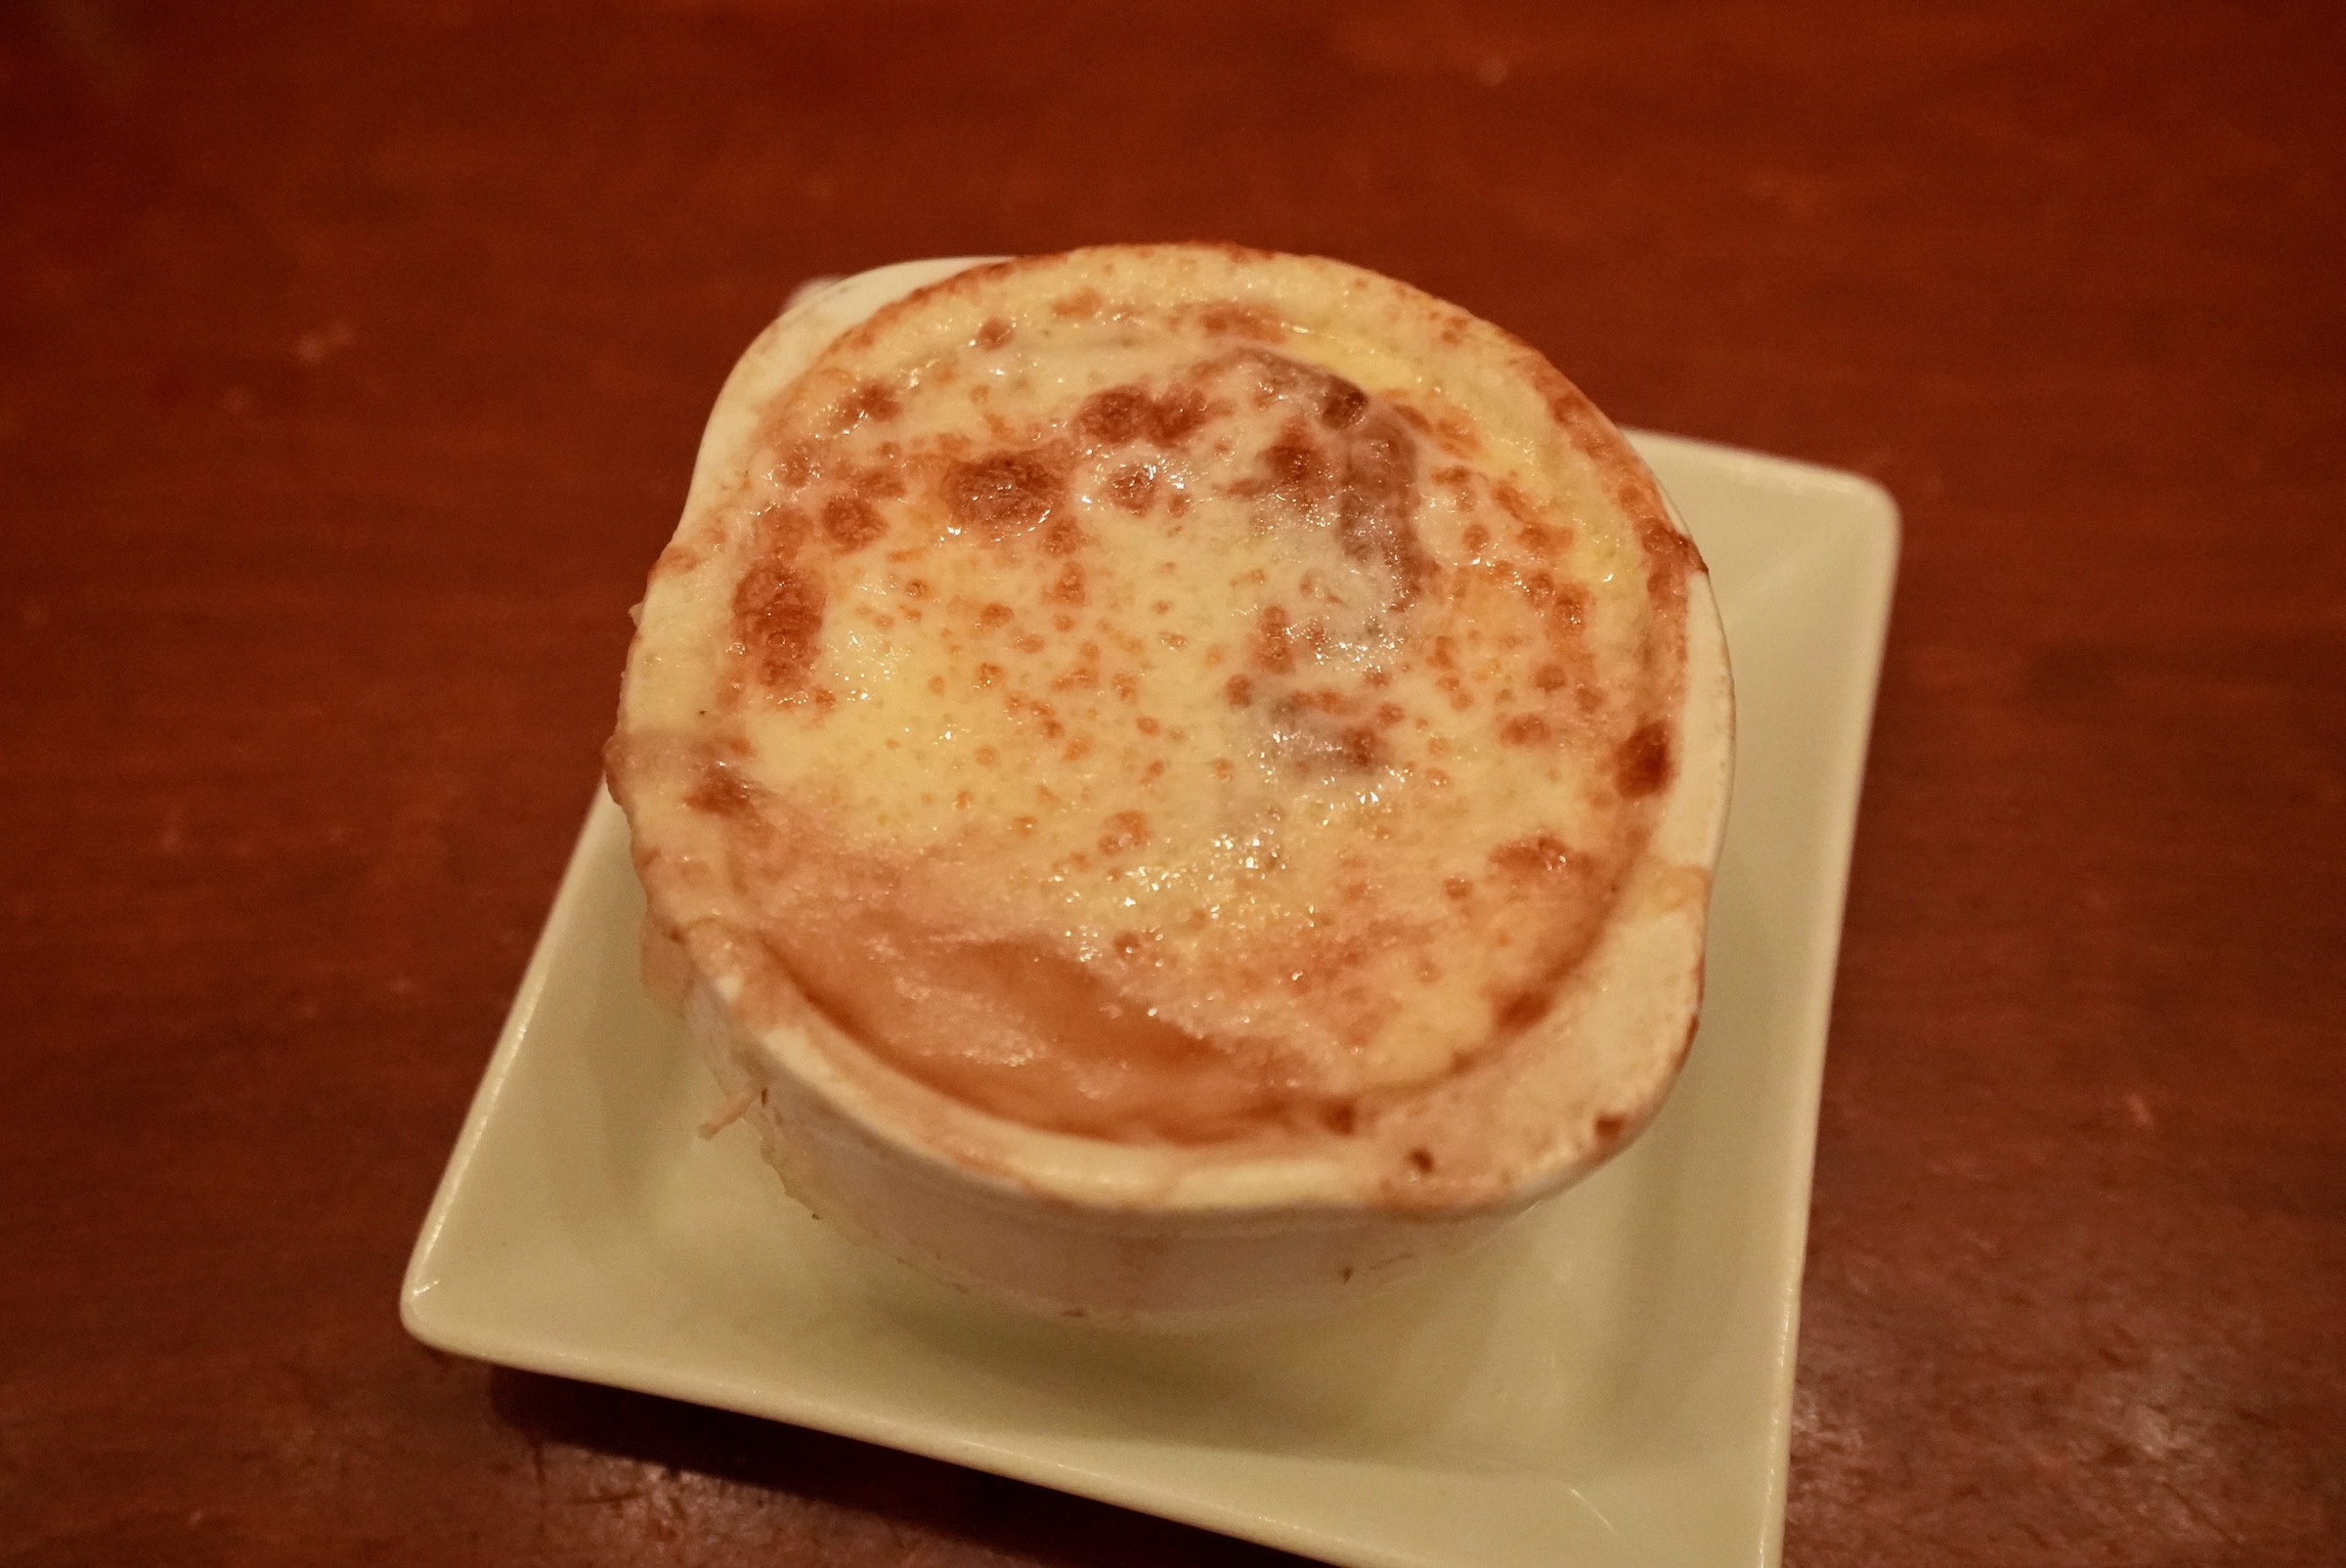 006_be-our-guest-magic-kingdom-french-onion-soup.jpeg